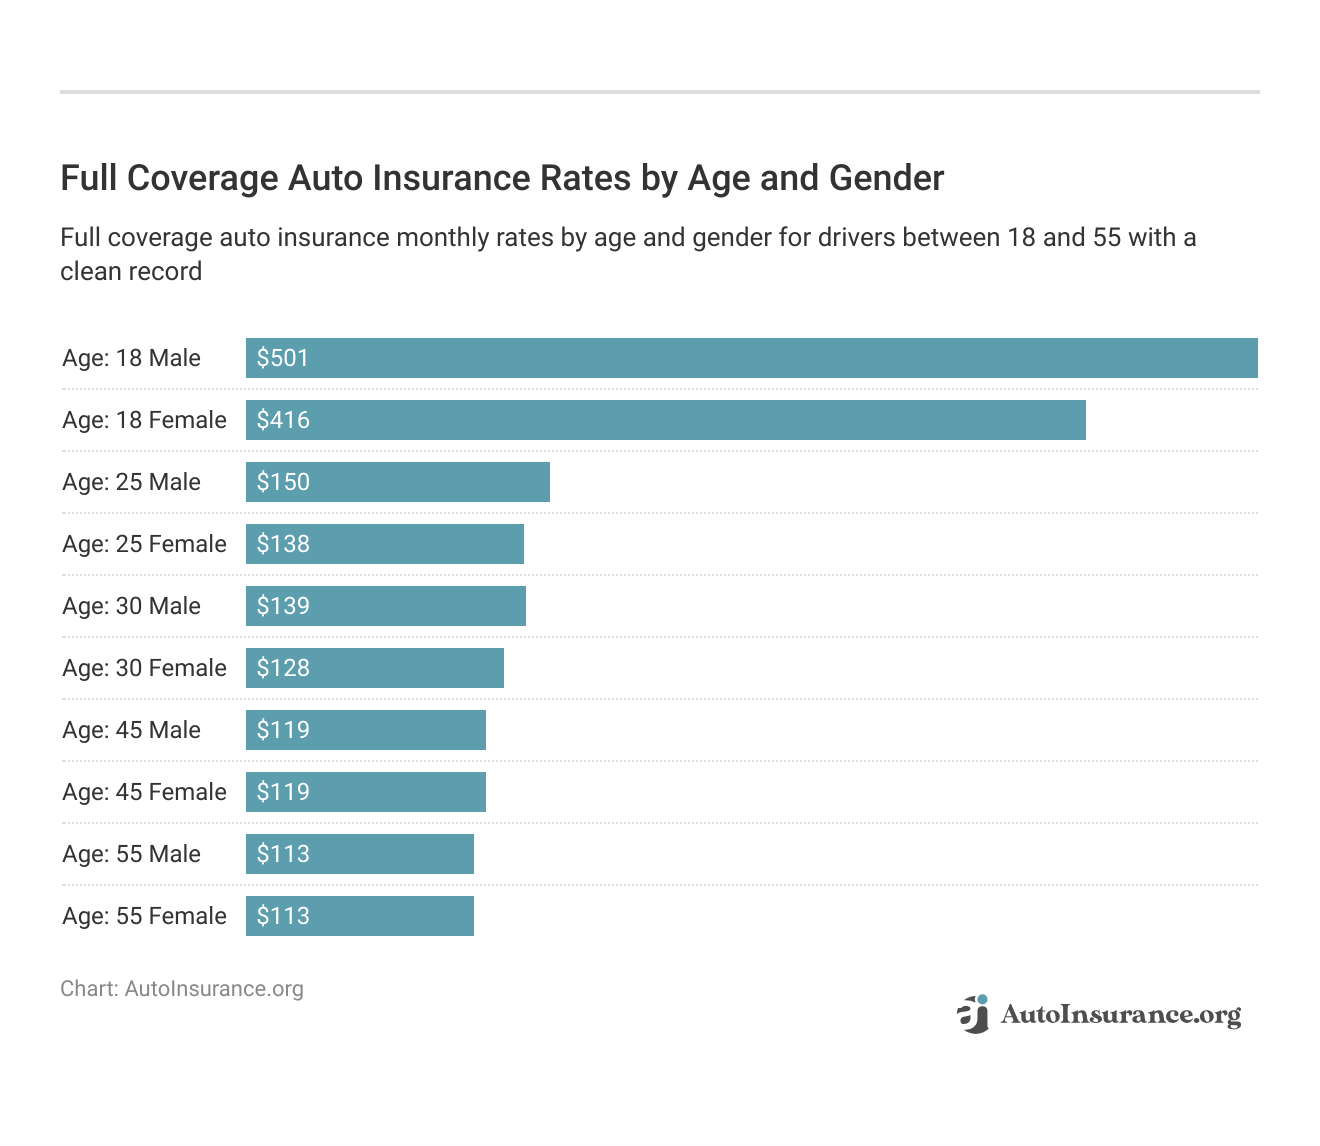 <h3>Full Coverage Auto Insurance Rates by Age and Gender</h3>